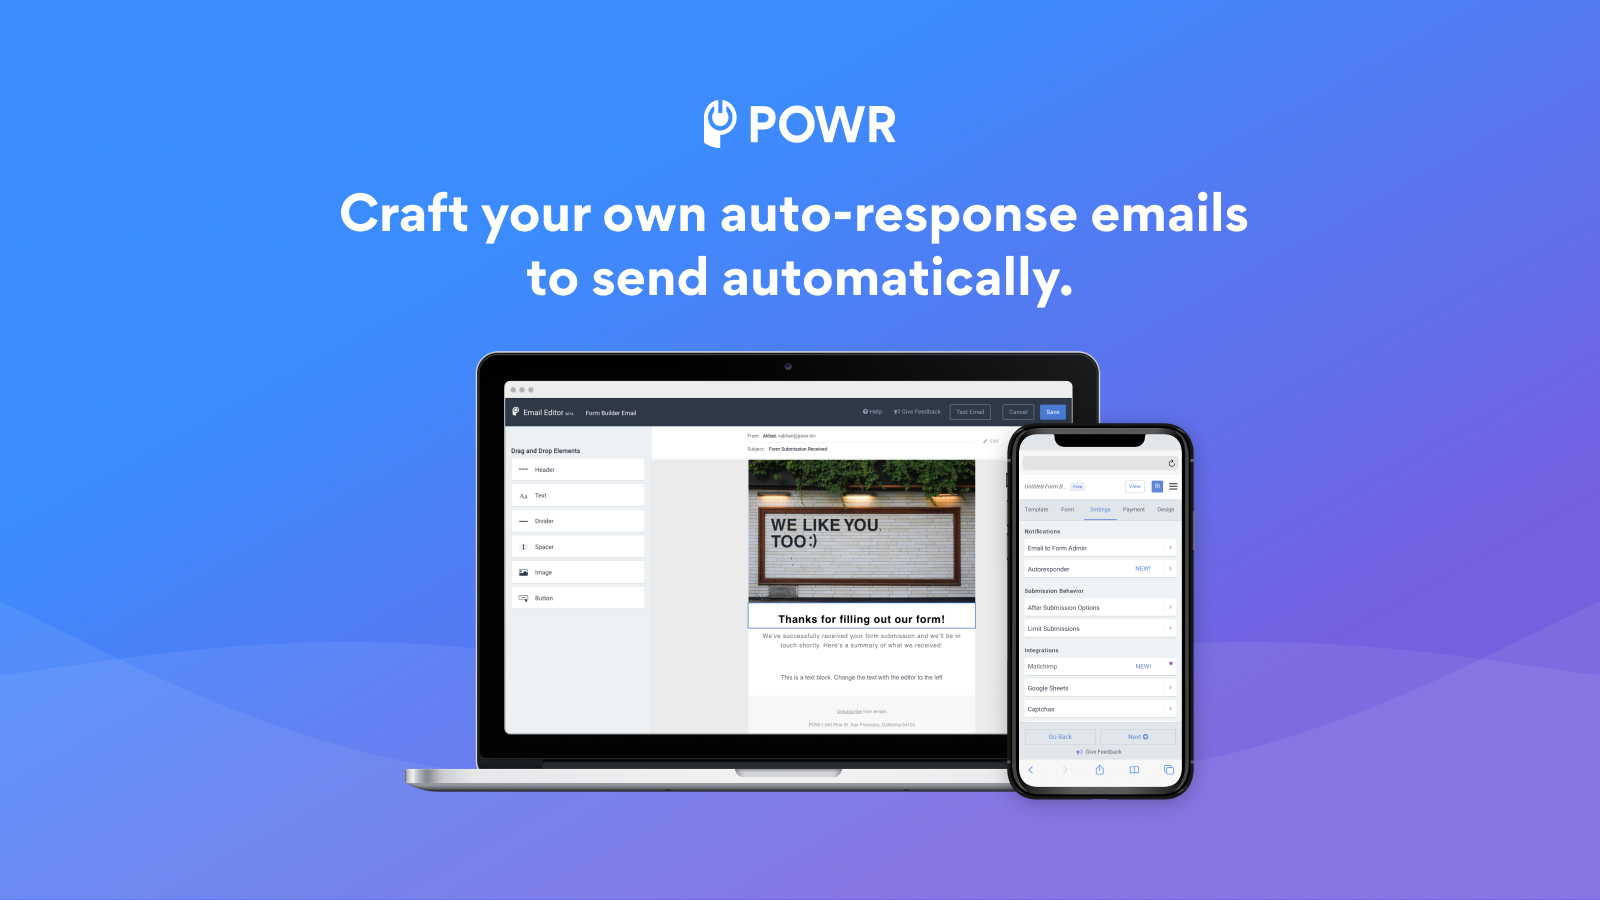 Create custom autoresponders for instant replies to submissions.